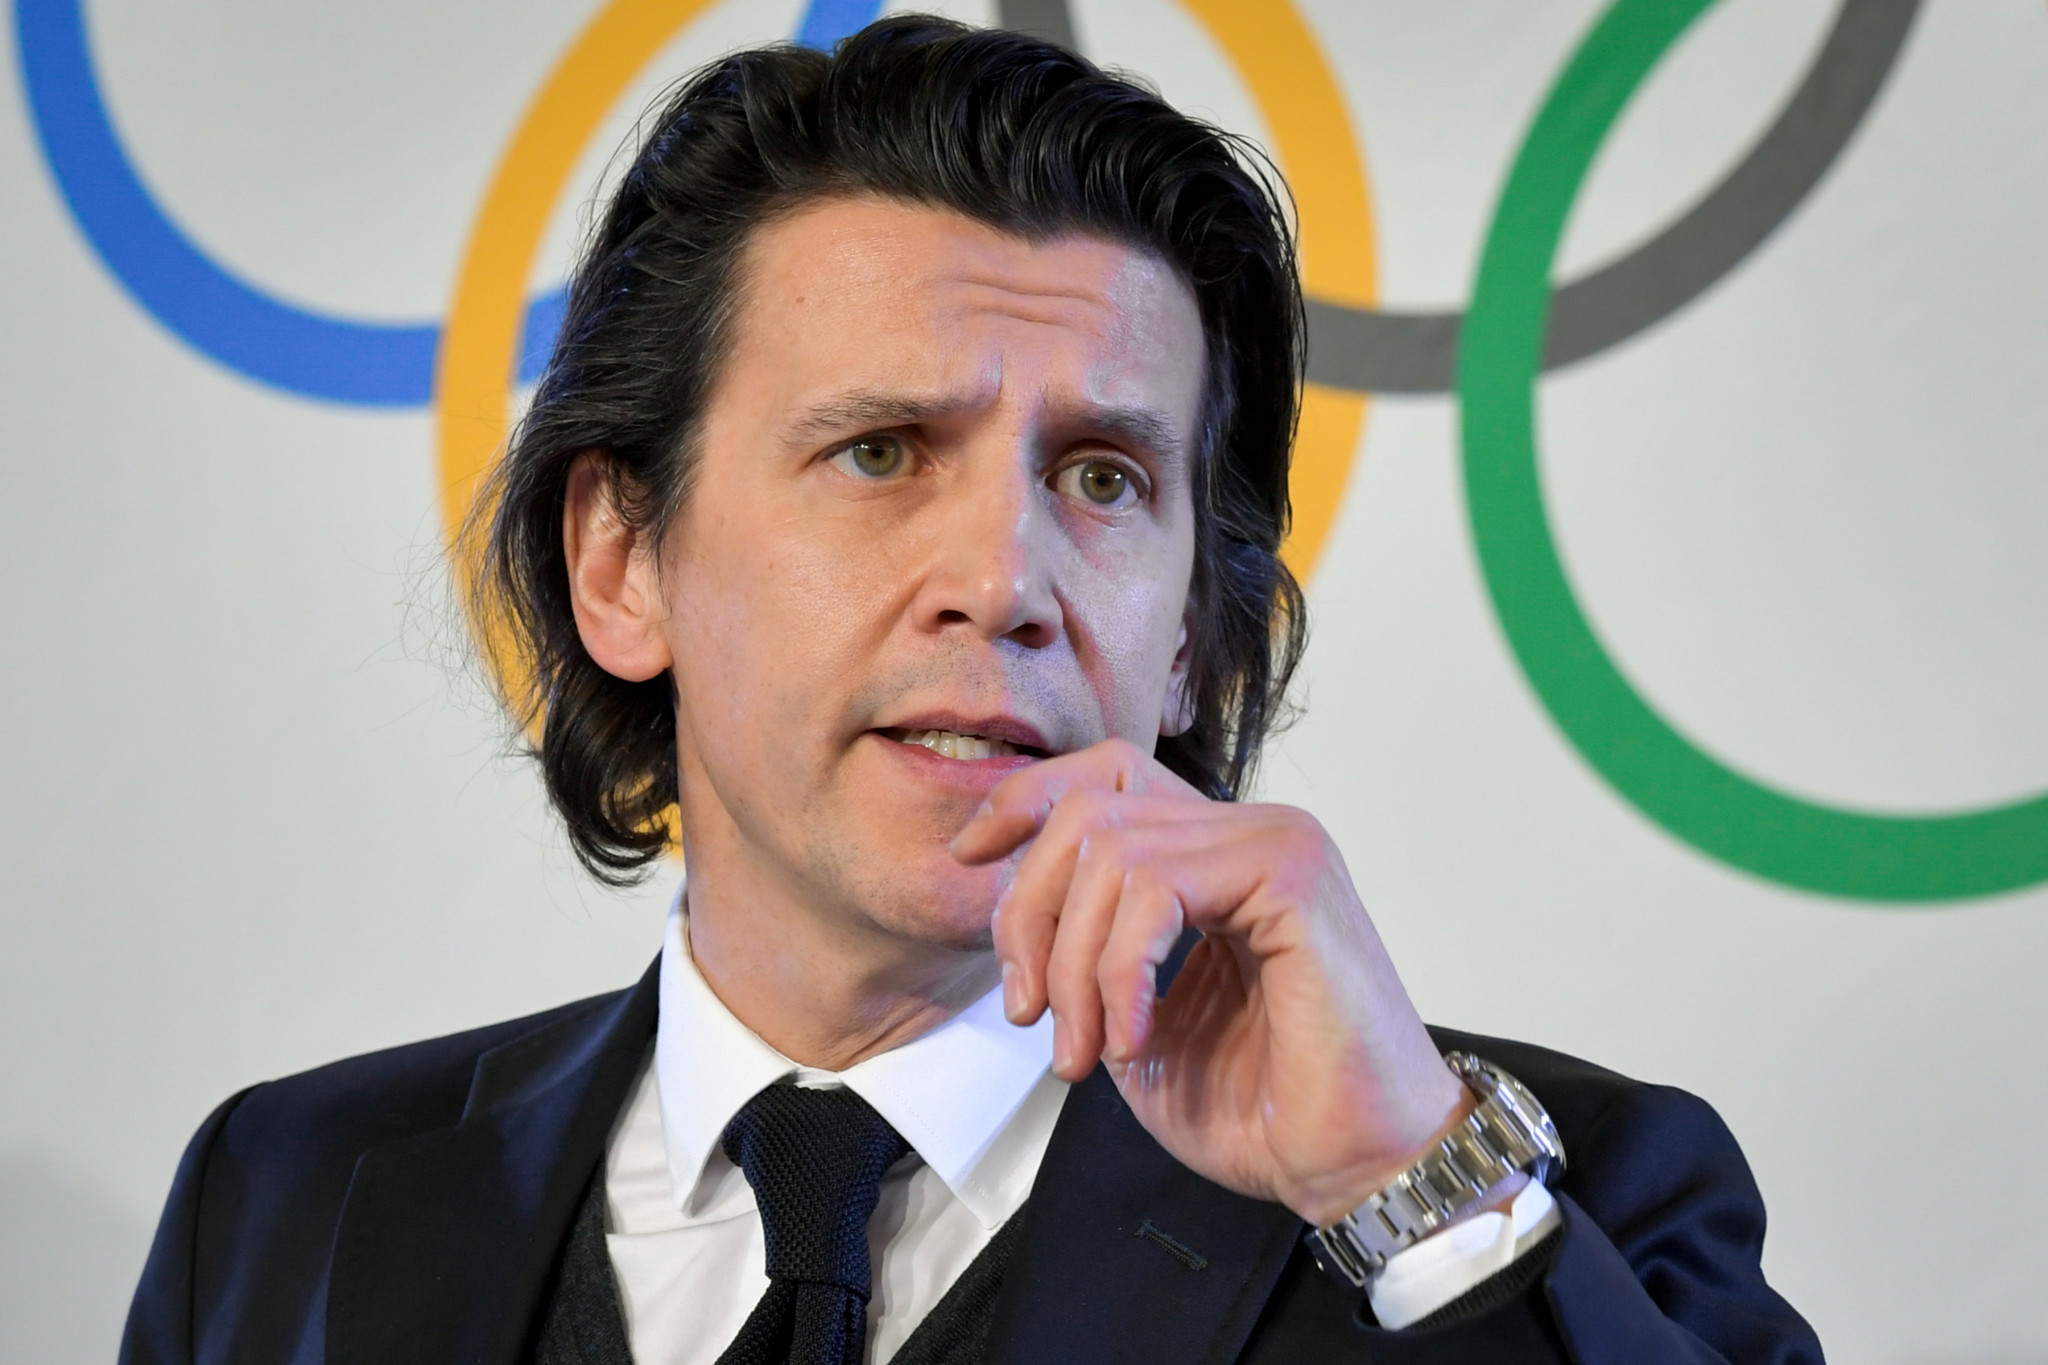 Dubi defends conduct and integrity of IOC in plea to Sion referendum voters